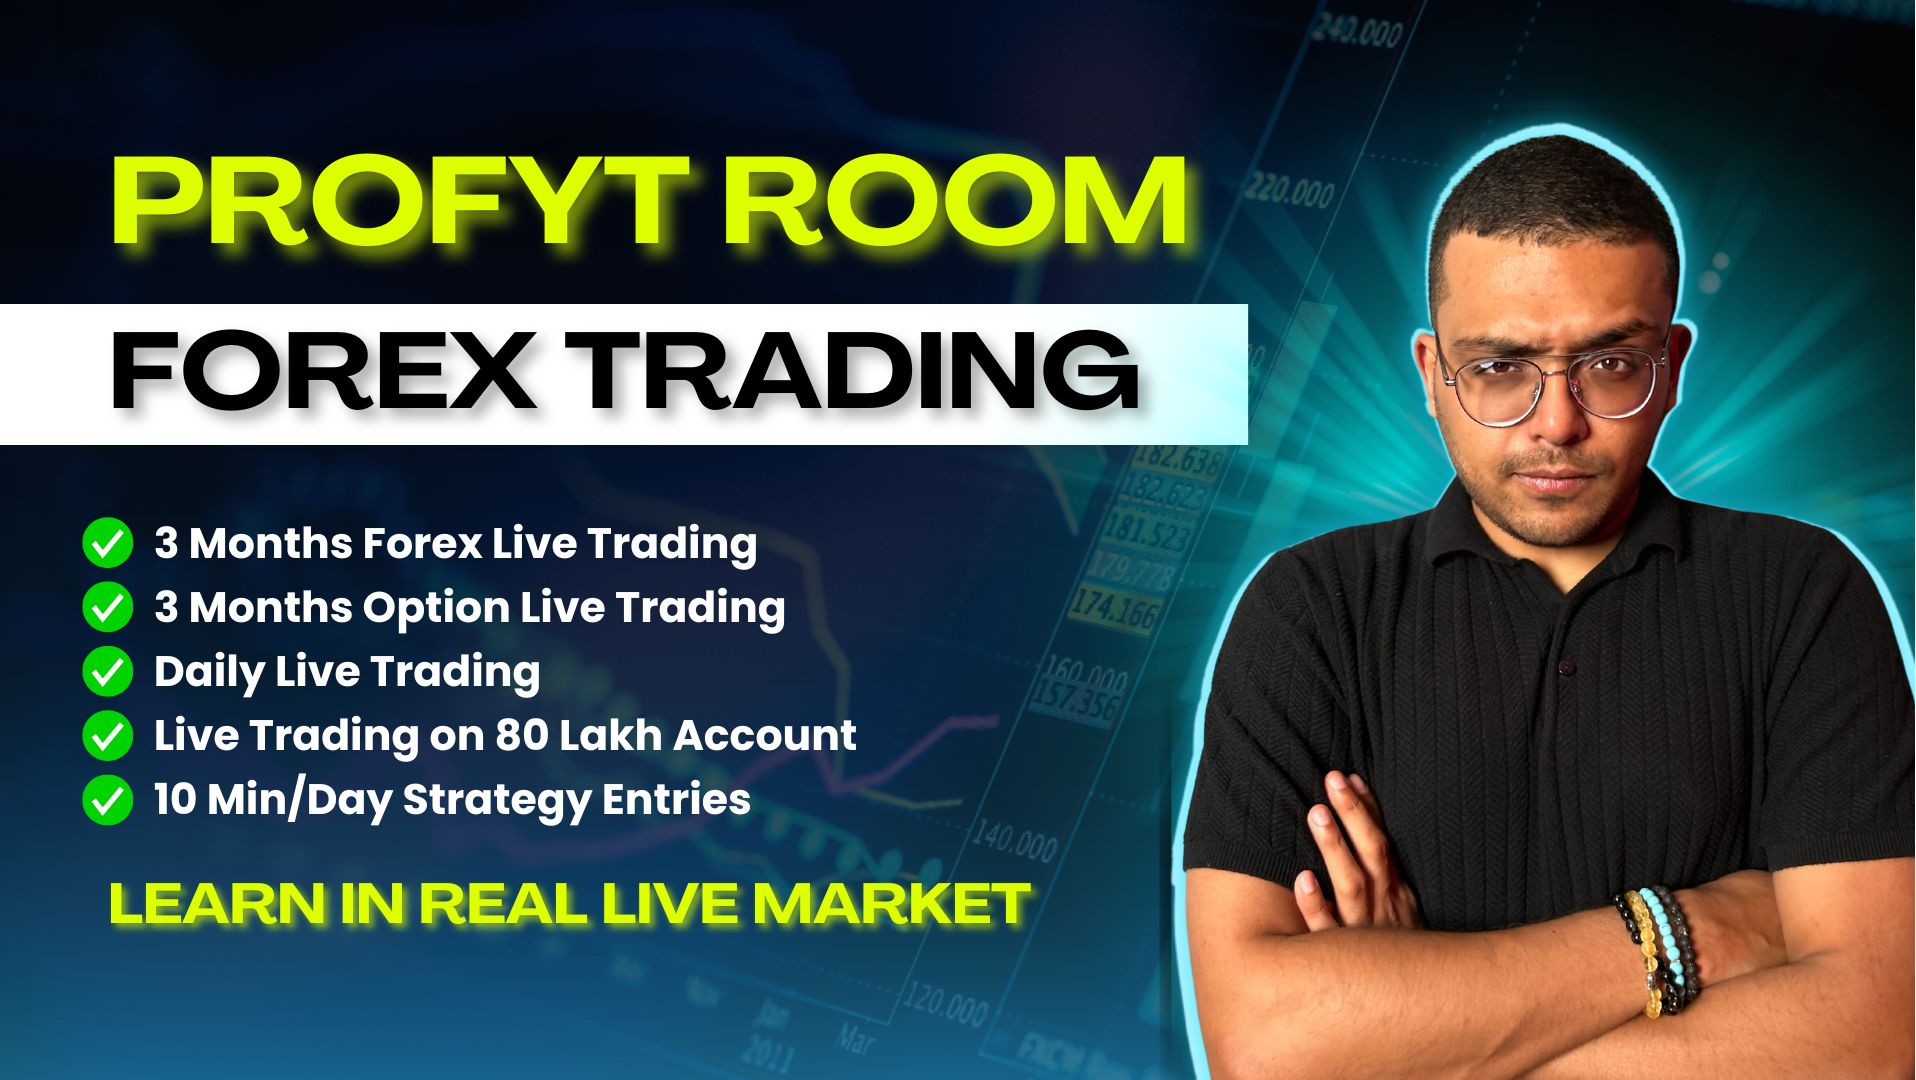 Live Trading Forex : Profyt Room (May/June)